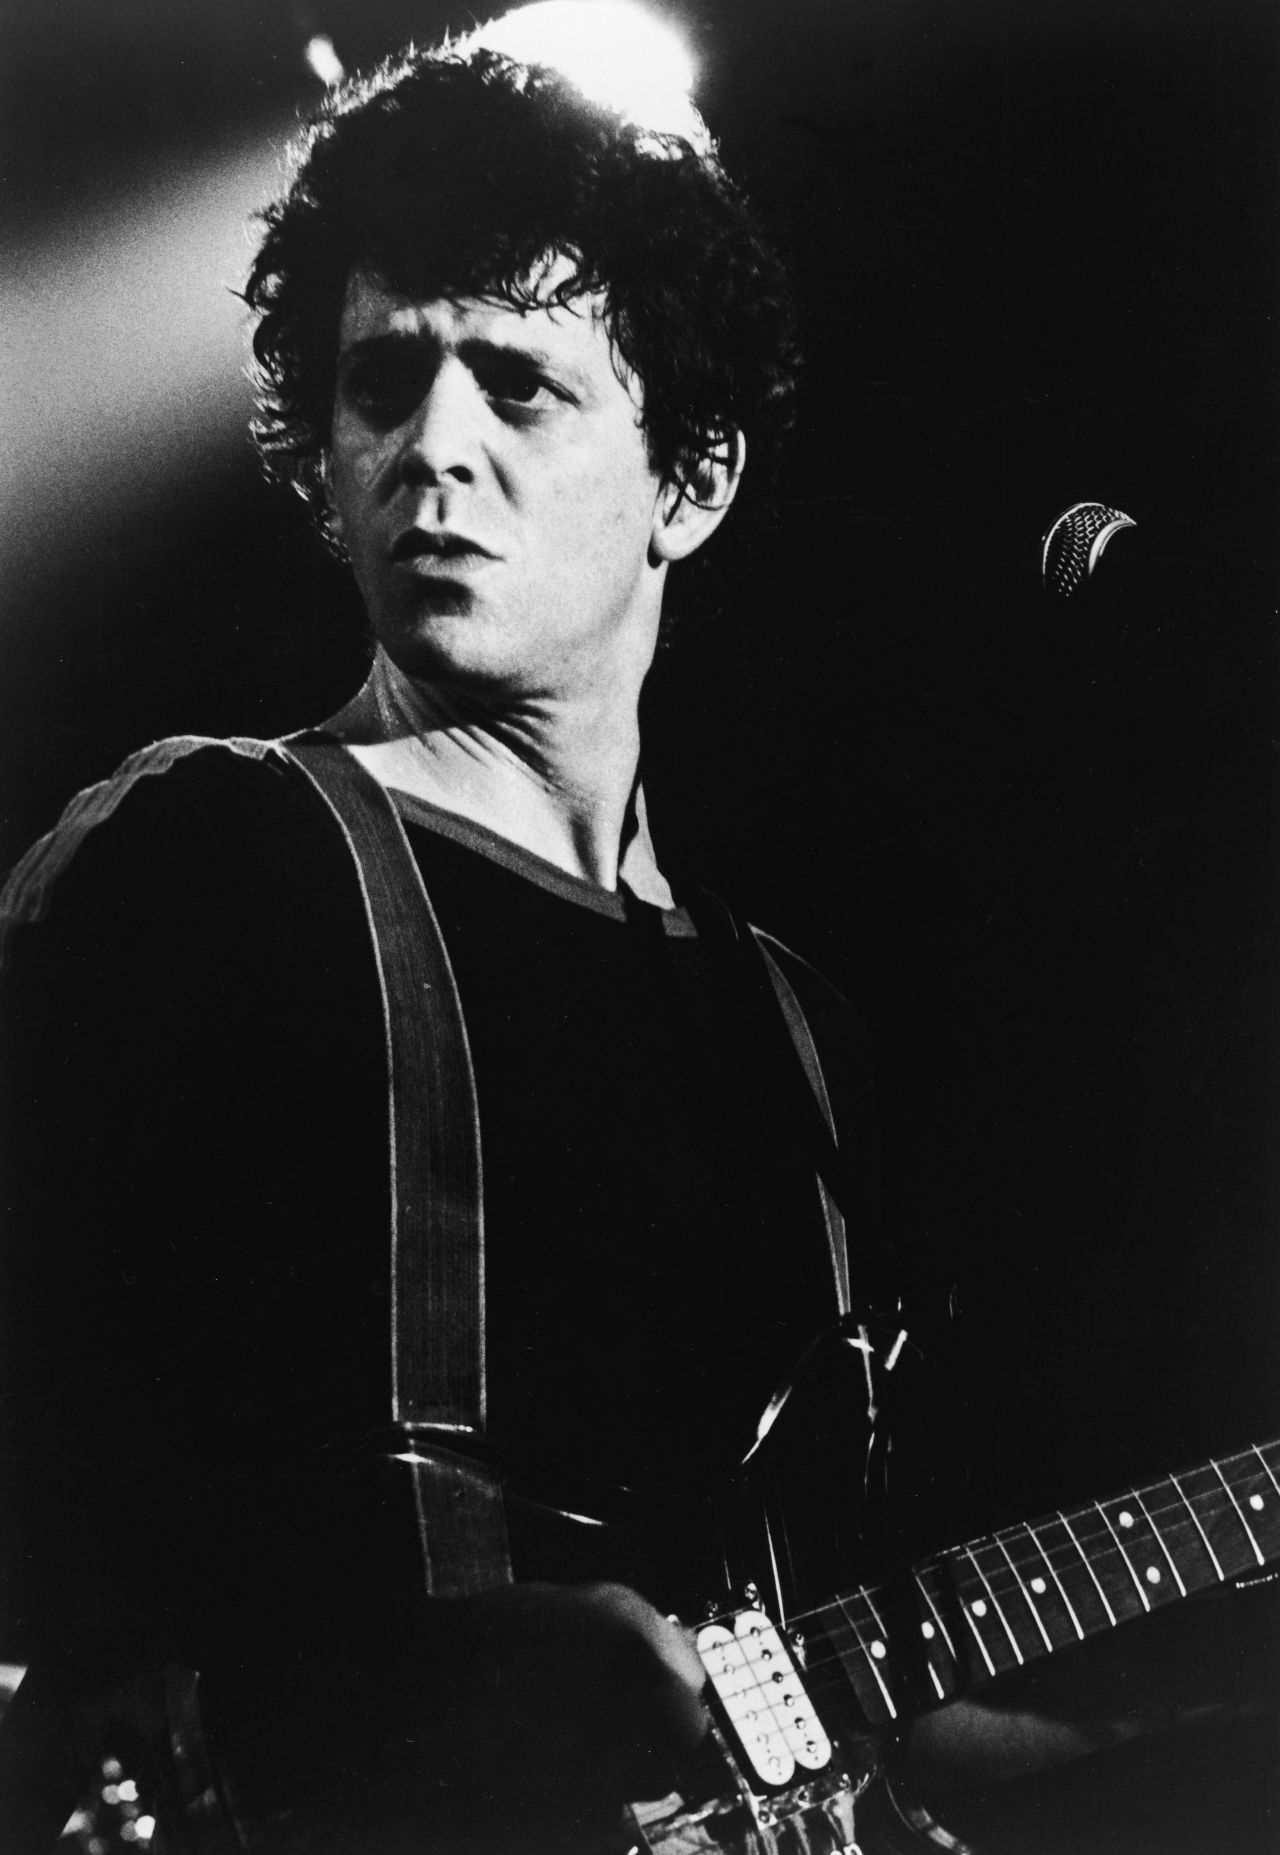 Lou Reed, who took rock 'n' roll into dark corners as a songwriter, vocalist and guitarist, died Sunday, October 27, at the age of 71.